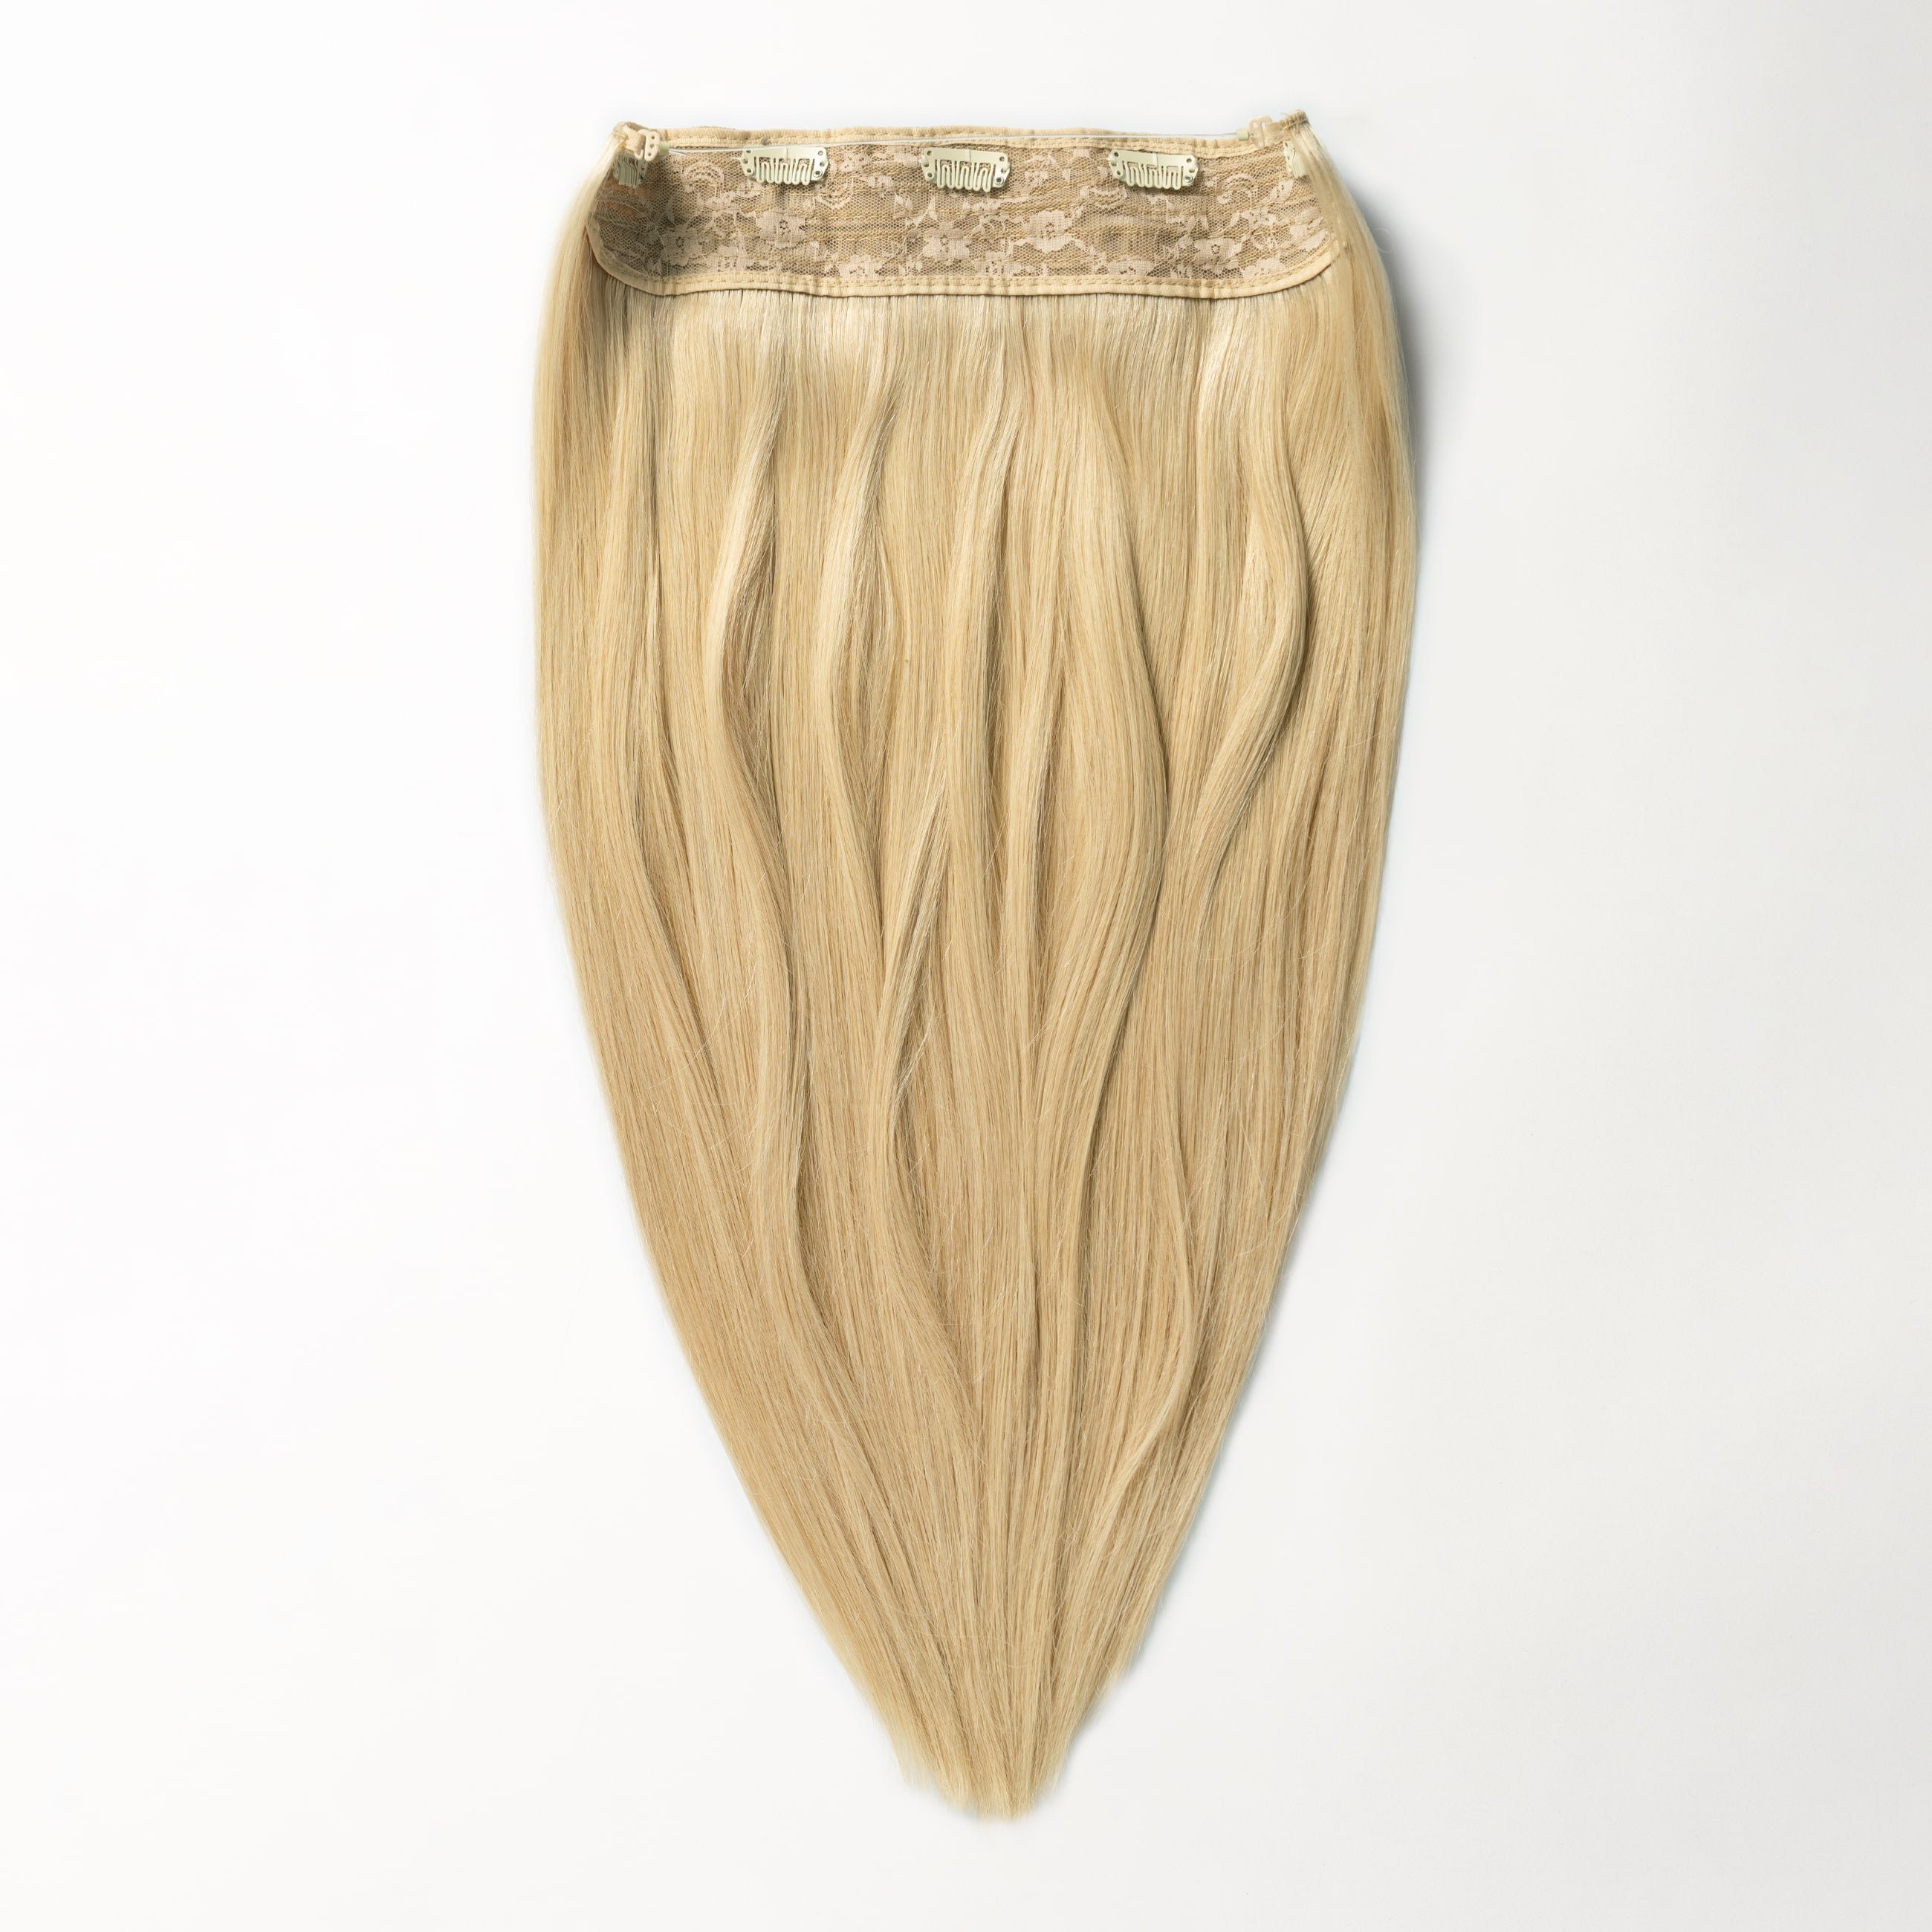 Halo hair extensions - Honey Blonde 15A